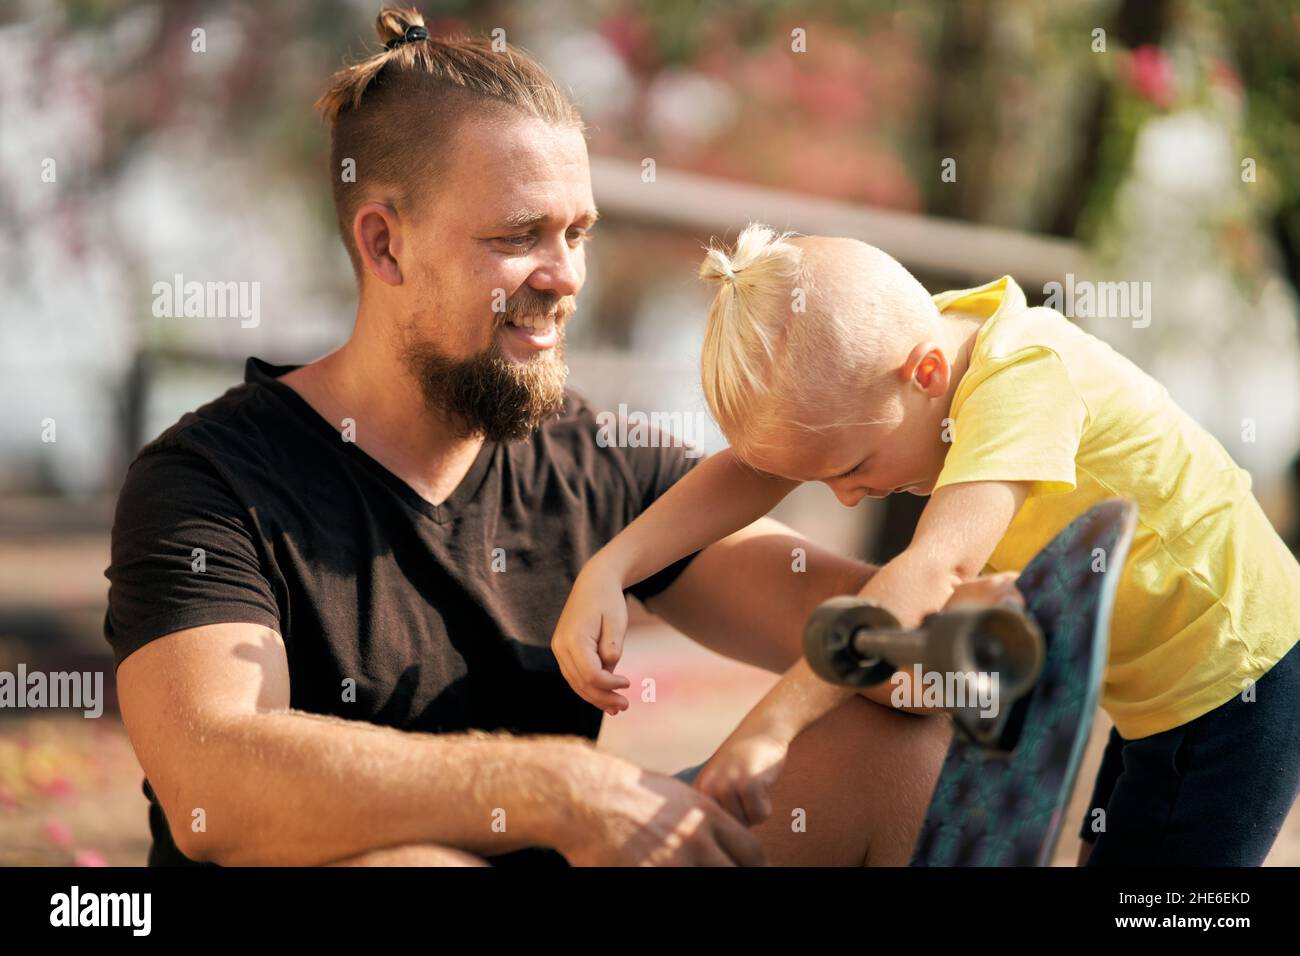 Father is spending quality time with with his little son in skate park Springtime. Family time together Stock Photo